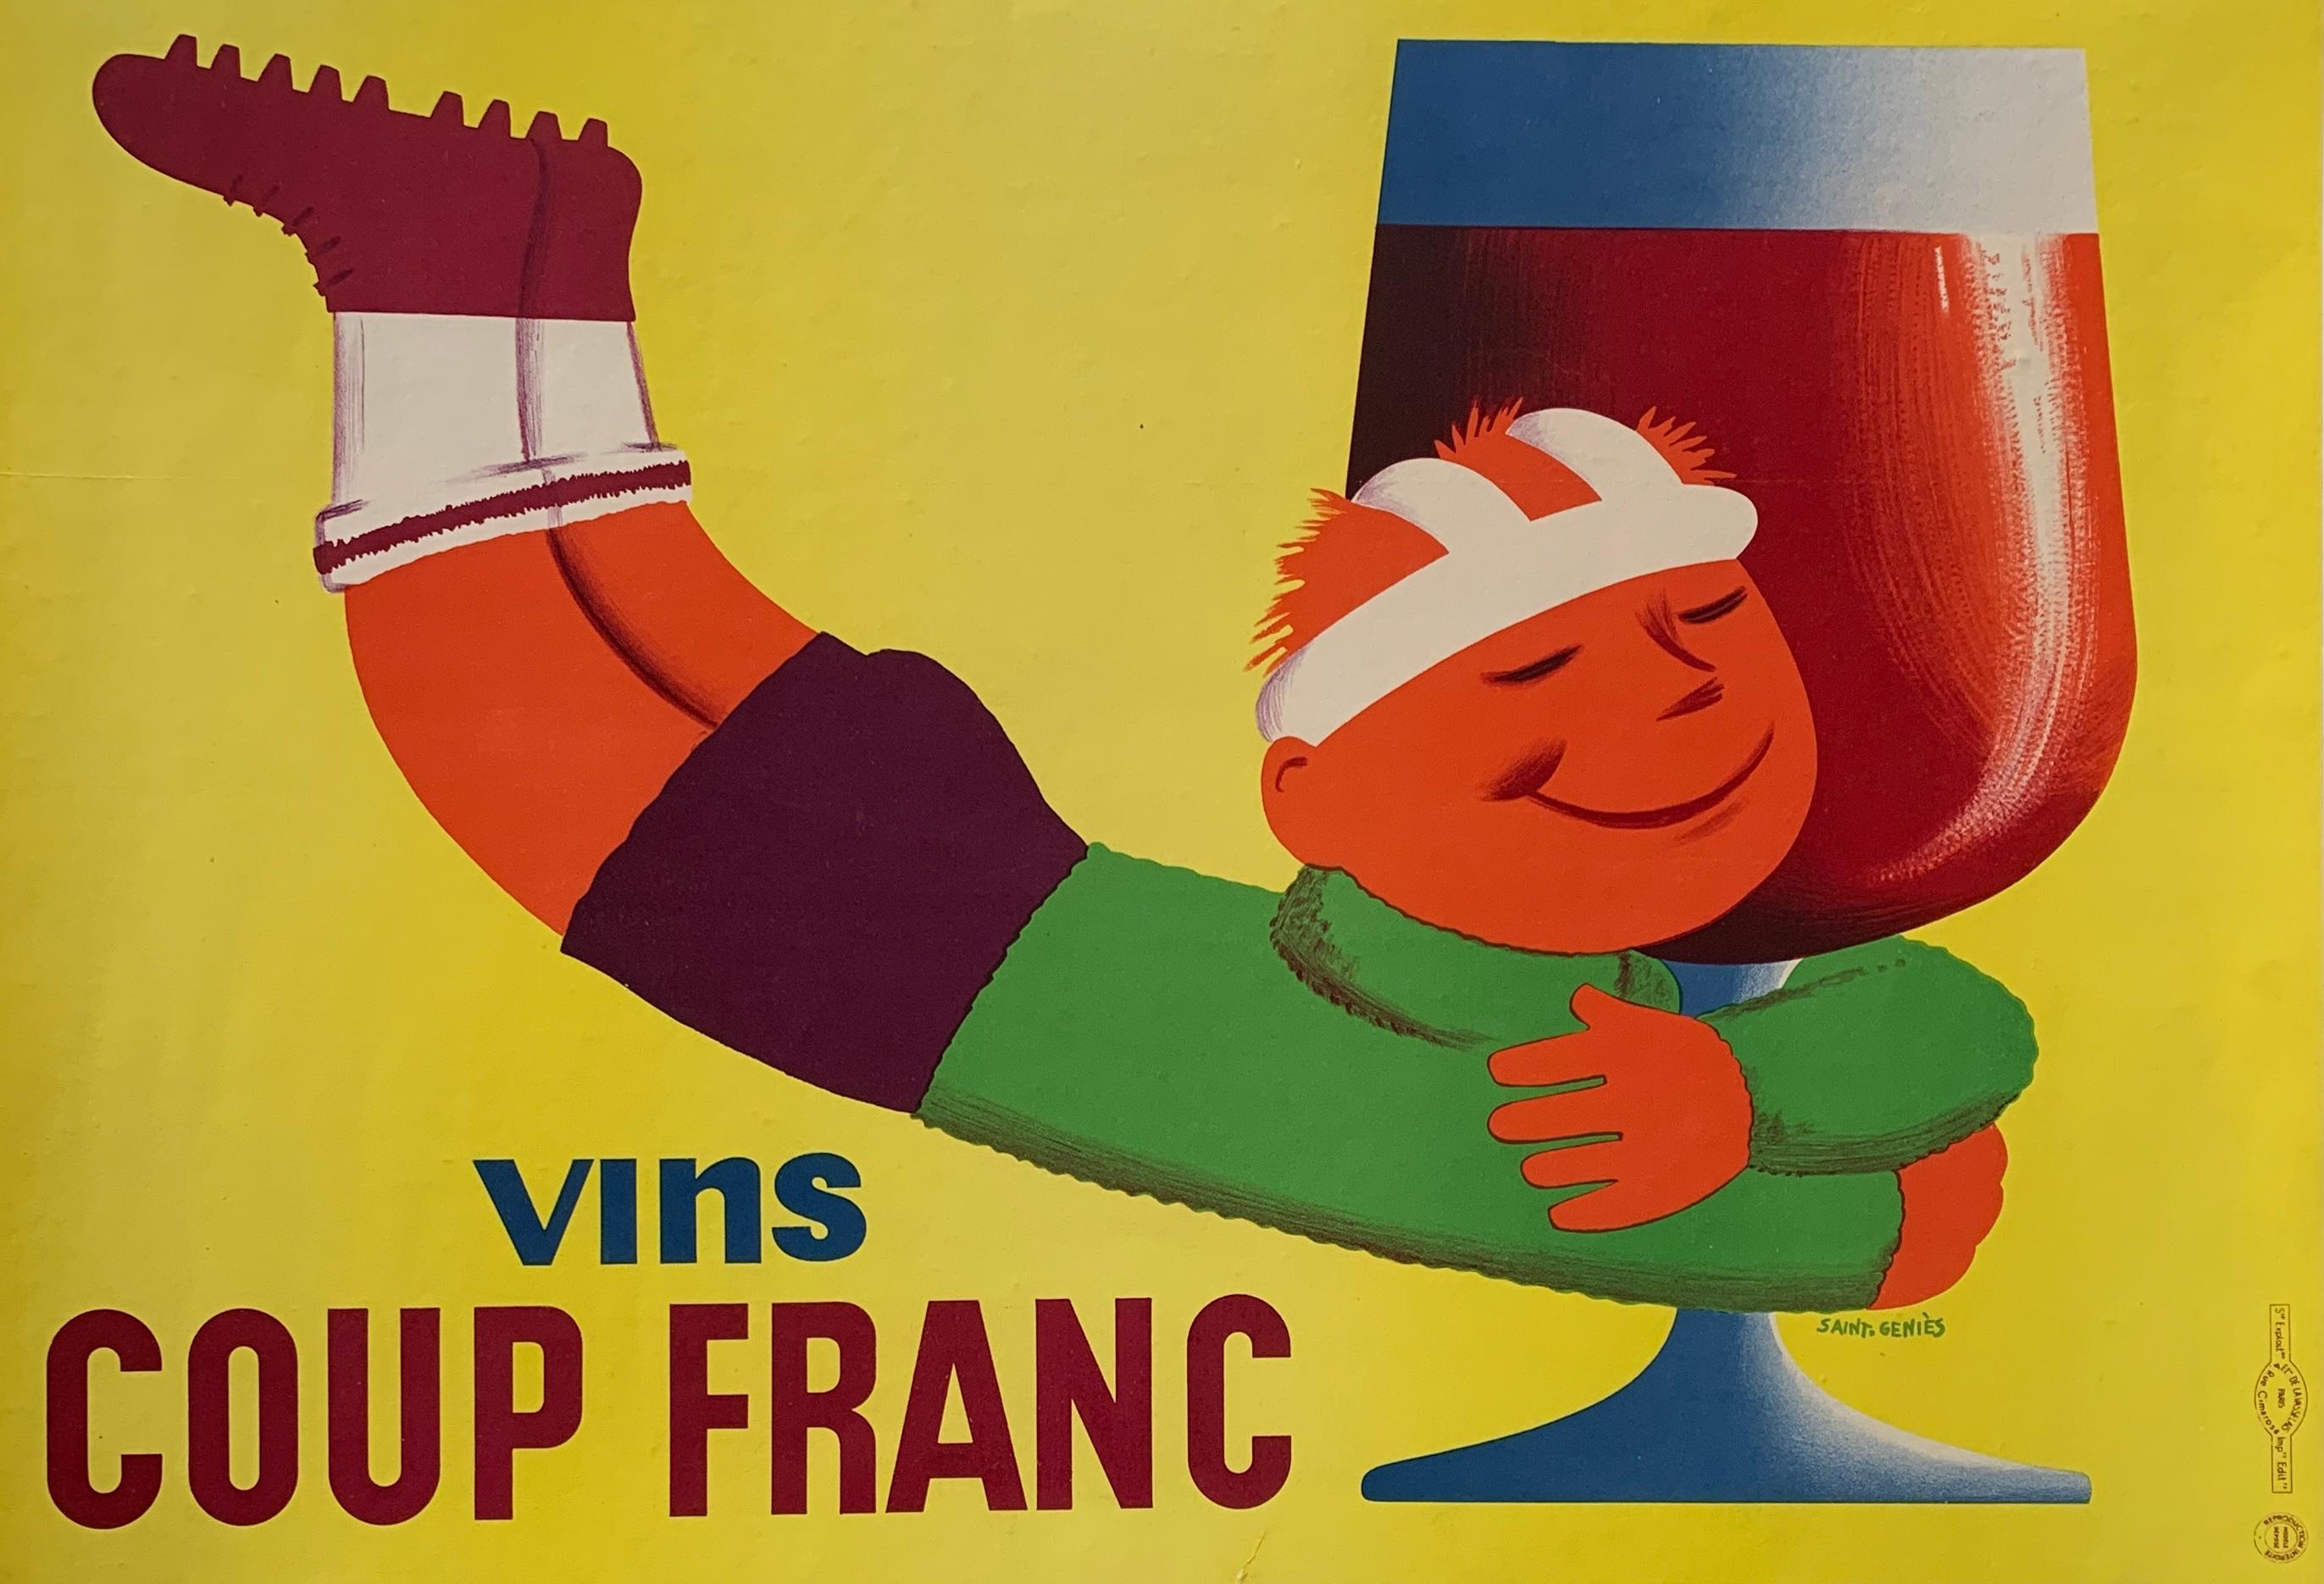 Vins Coup Franc Original Vintage Wine Poster by Saint Genies, C. 1950

An original 1950's poster for French wine, this poster has been linen backed for preservation 

Dimensions: 40 x 56 cm

Artist: Saint Genies

Year: Circa 1950

Condition: Good